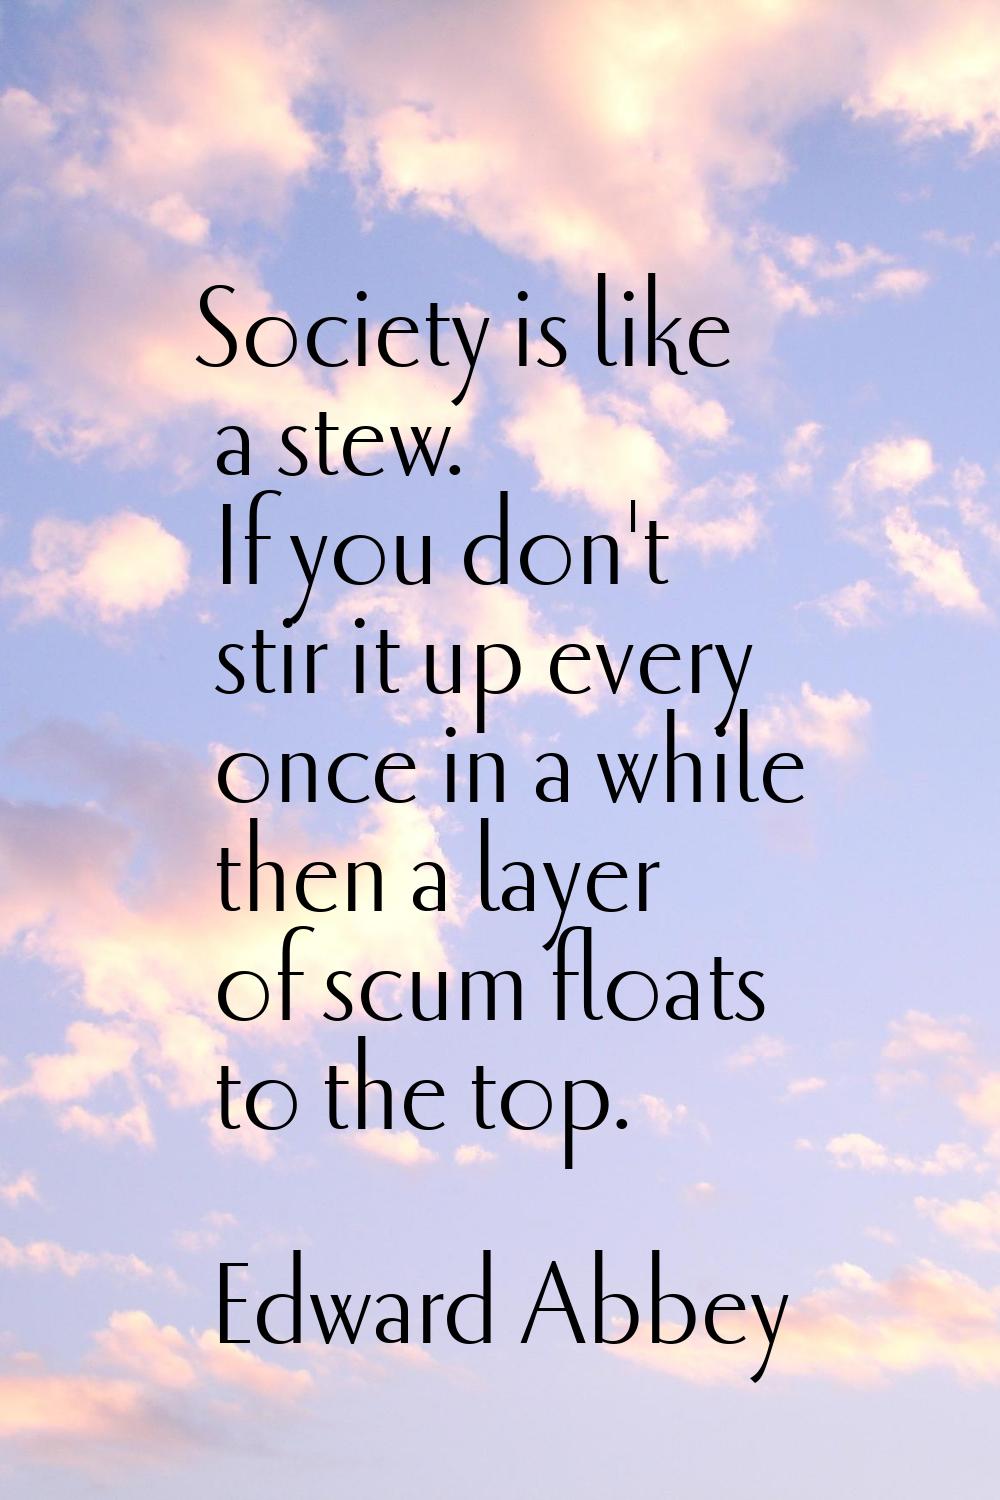 Society is like a stew. If you don't stir it up every once in a while then a layer of scum floats t